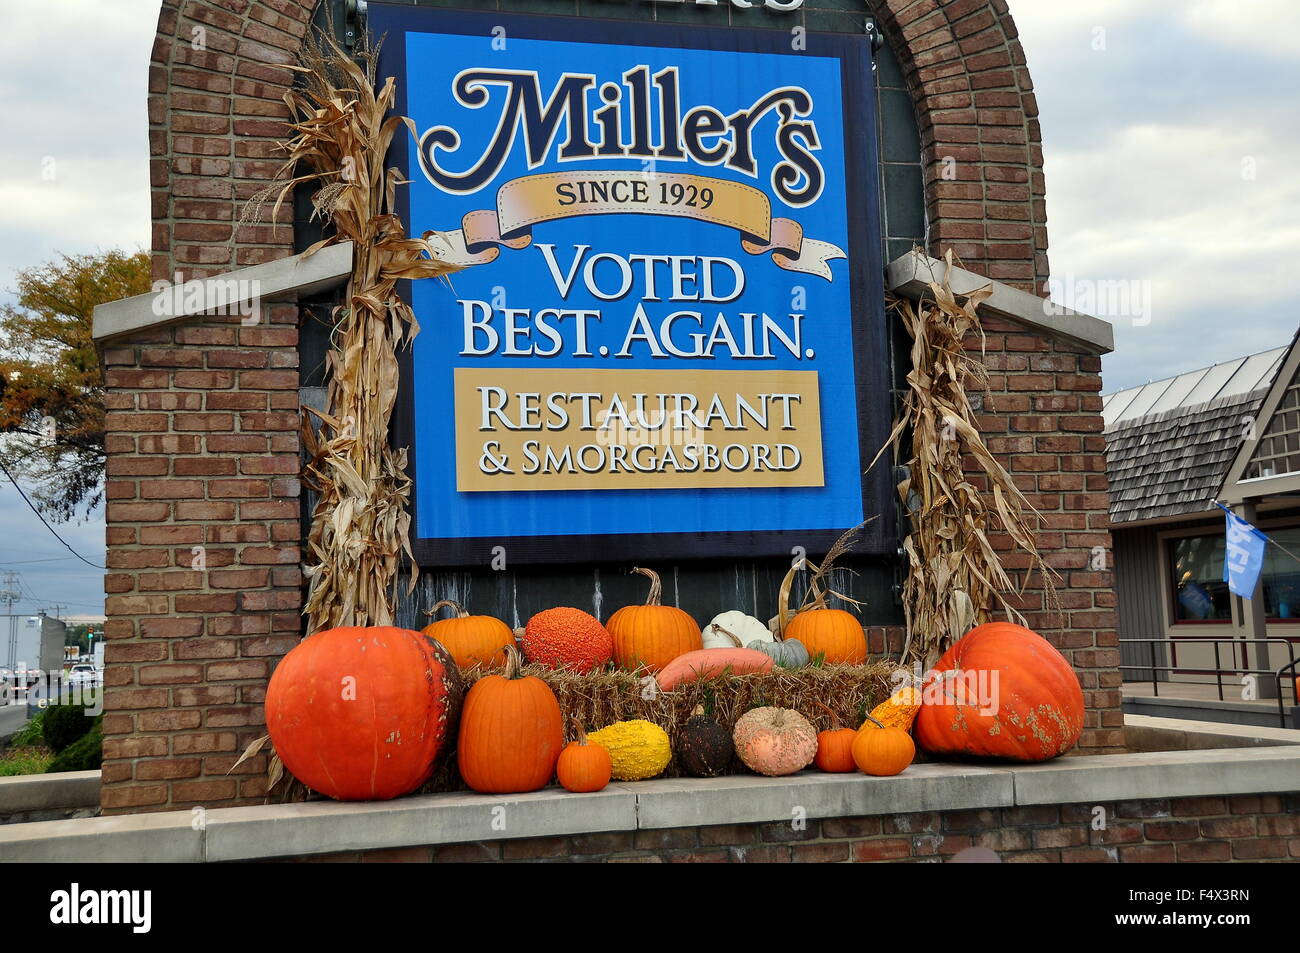 Ronks, Pennsylvania:  Autumnal display with pumpkins and gourds at Miller's Restaurant & Smorgasbord Stock Photo